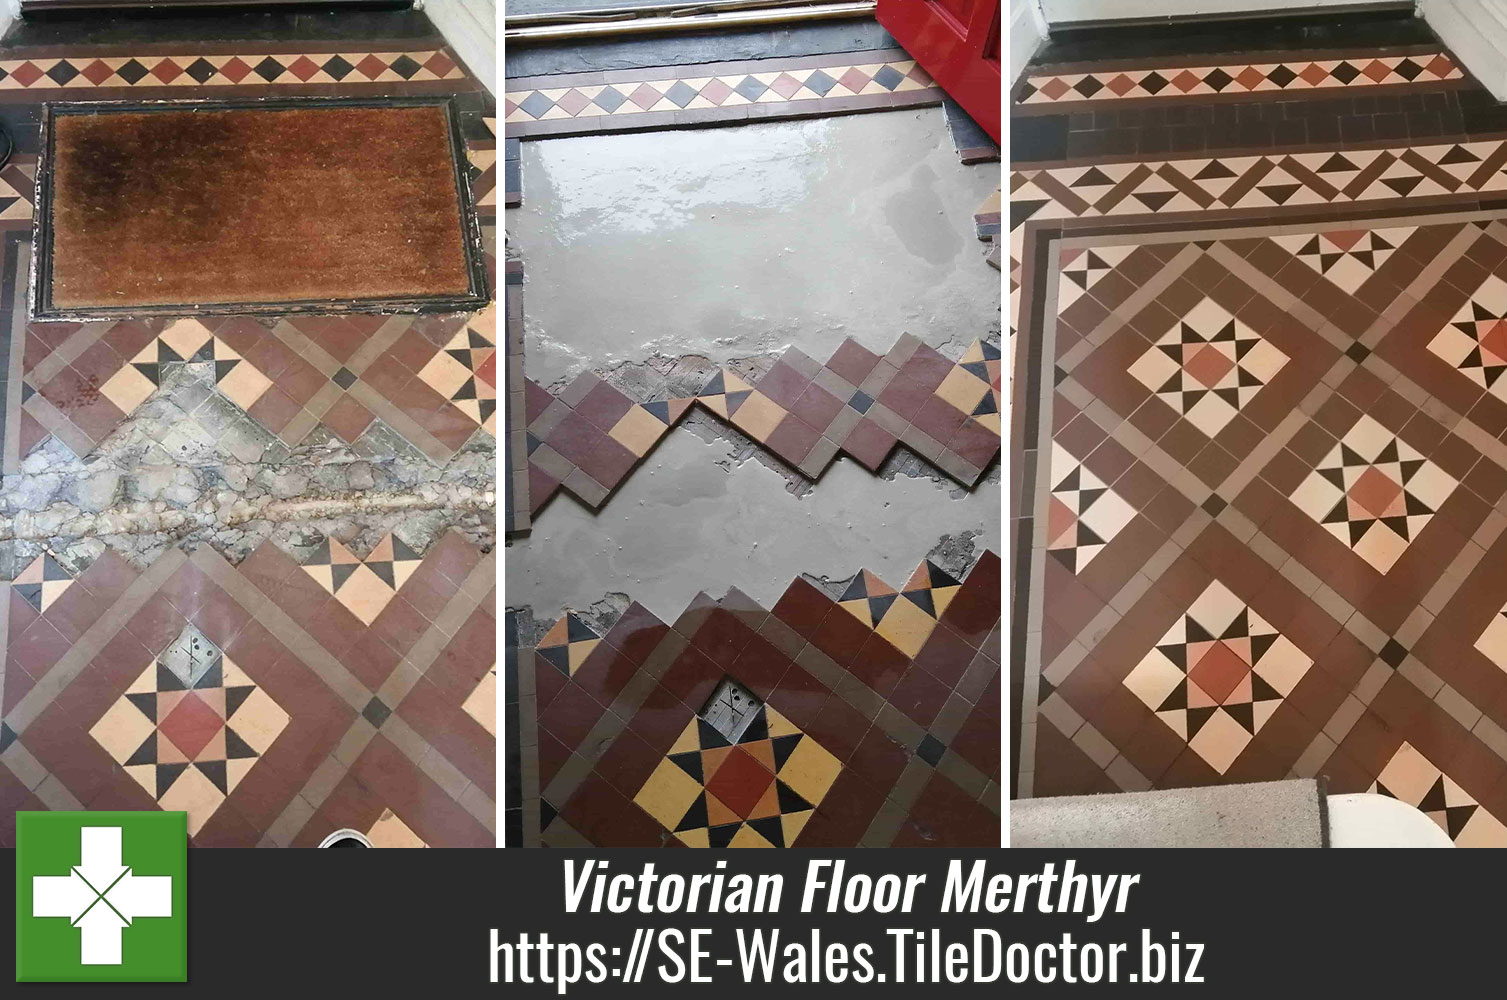 Colour Grow chosen to Seal Victorian Hallway Tiles in Merthyr Tydfil South Wales